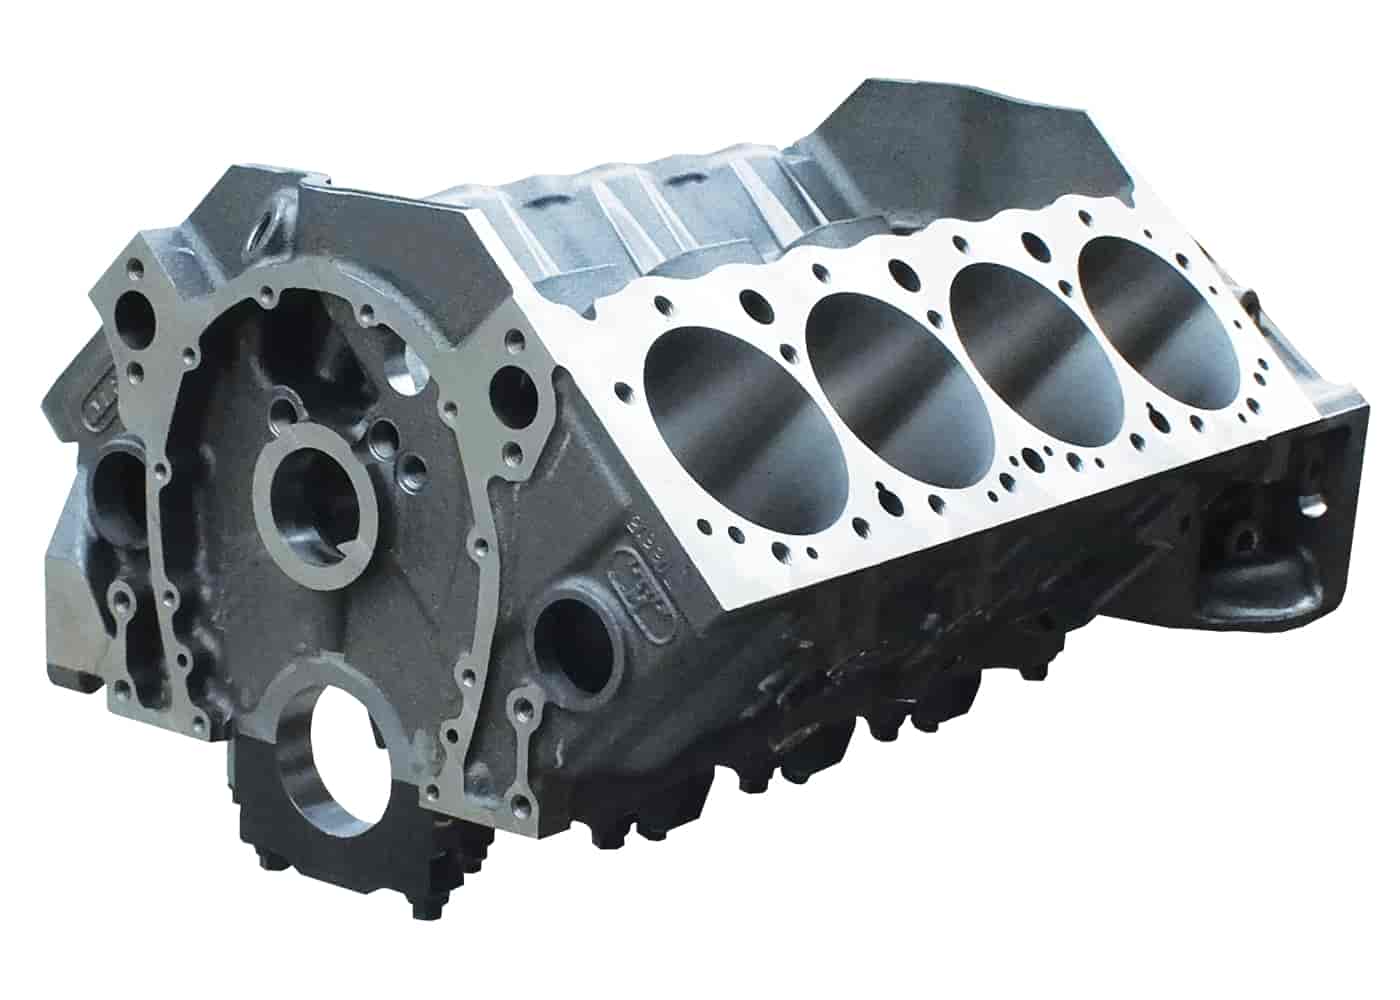 Little M Engine Block Small Block Chevy 9.325 in. Deck, +.391 in. Raised Camshaft